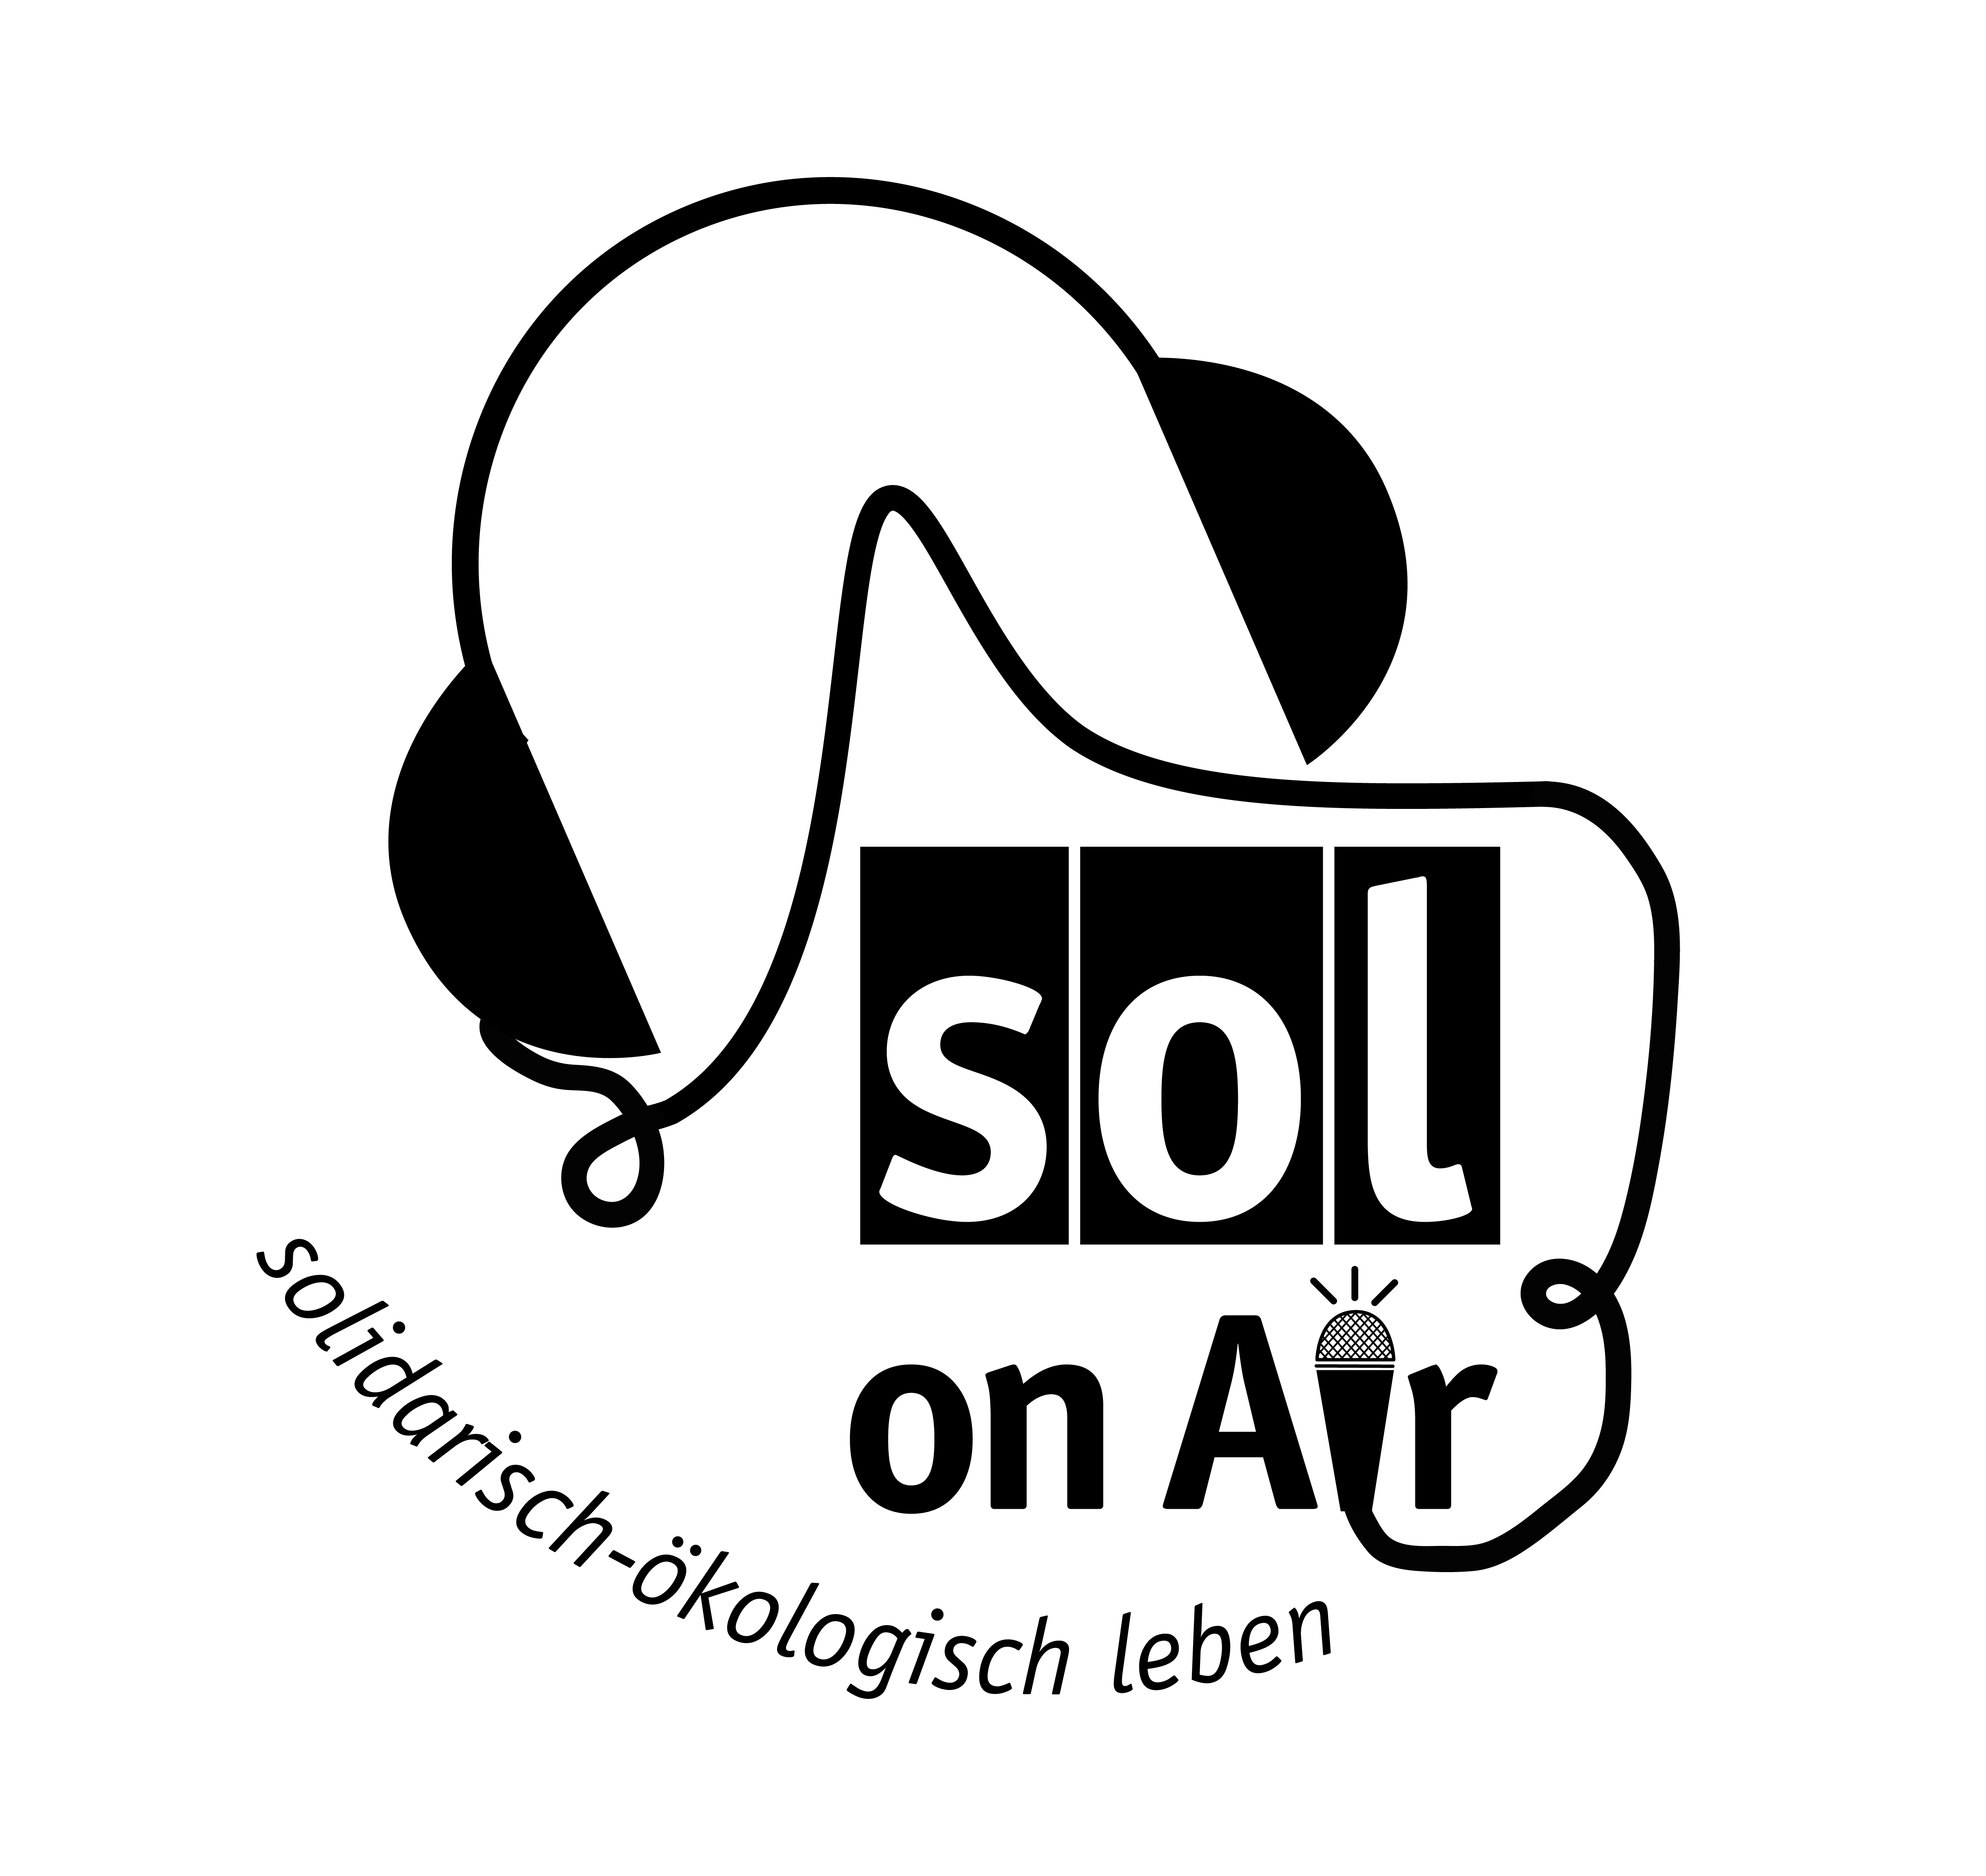 SOL on Air